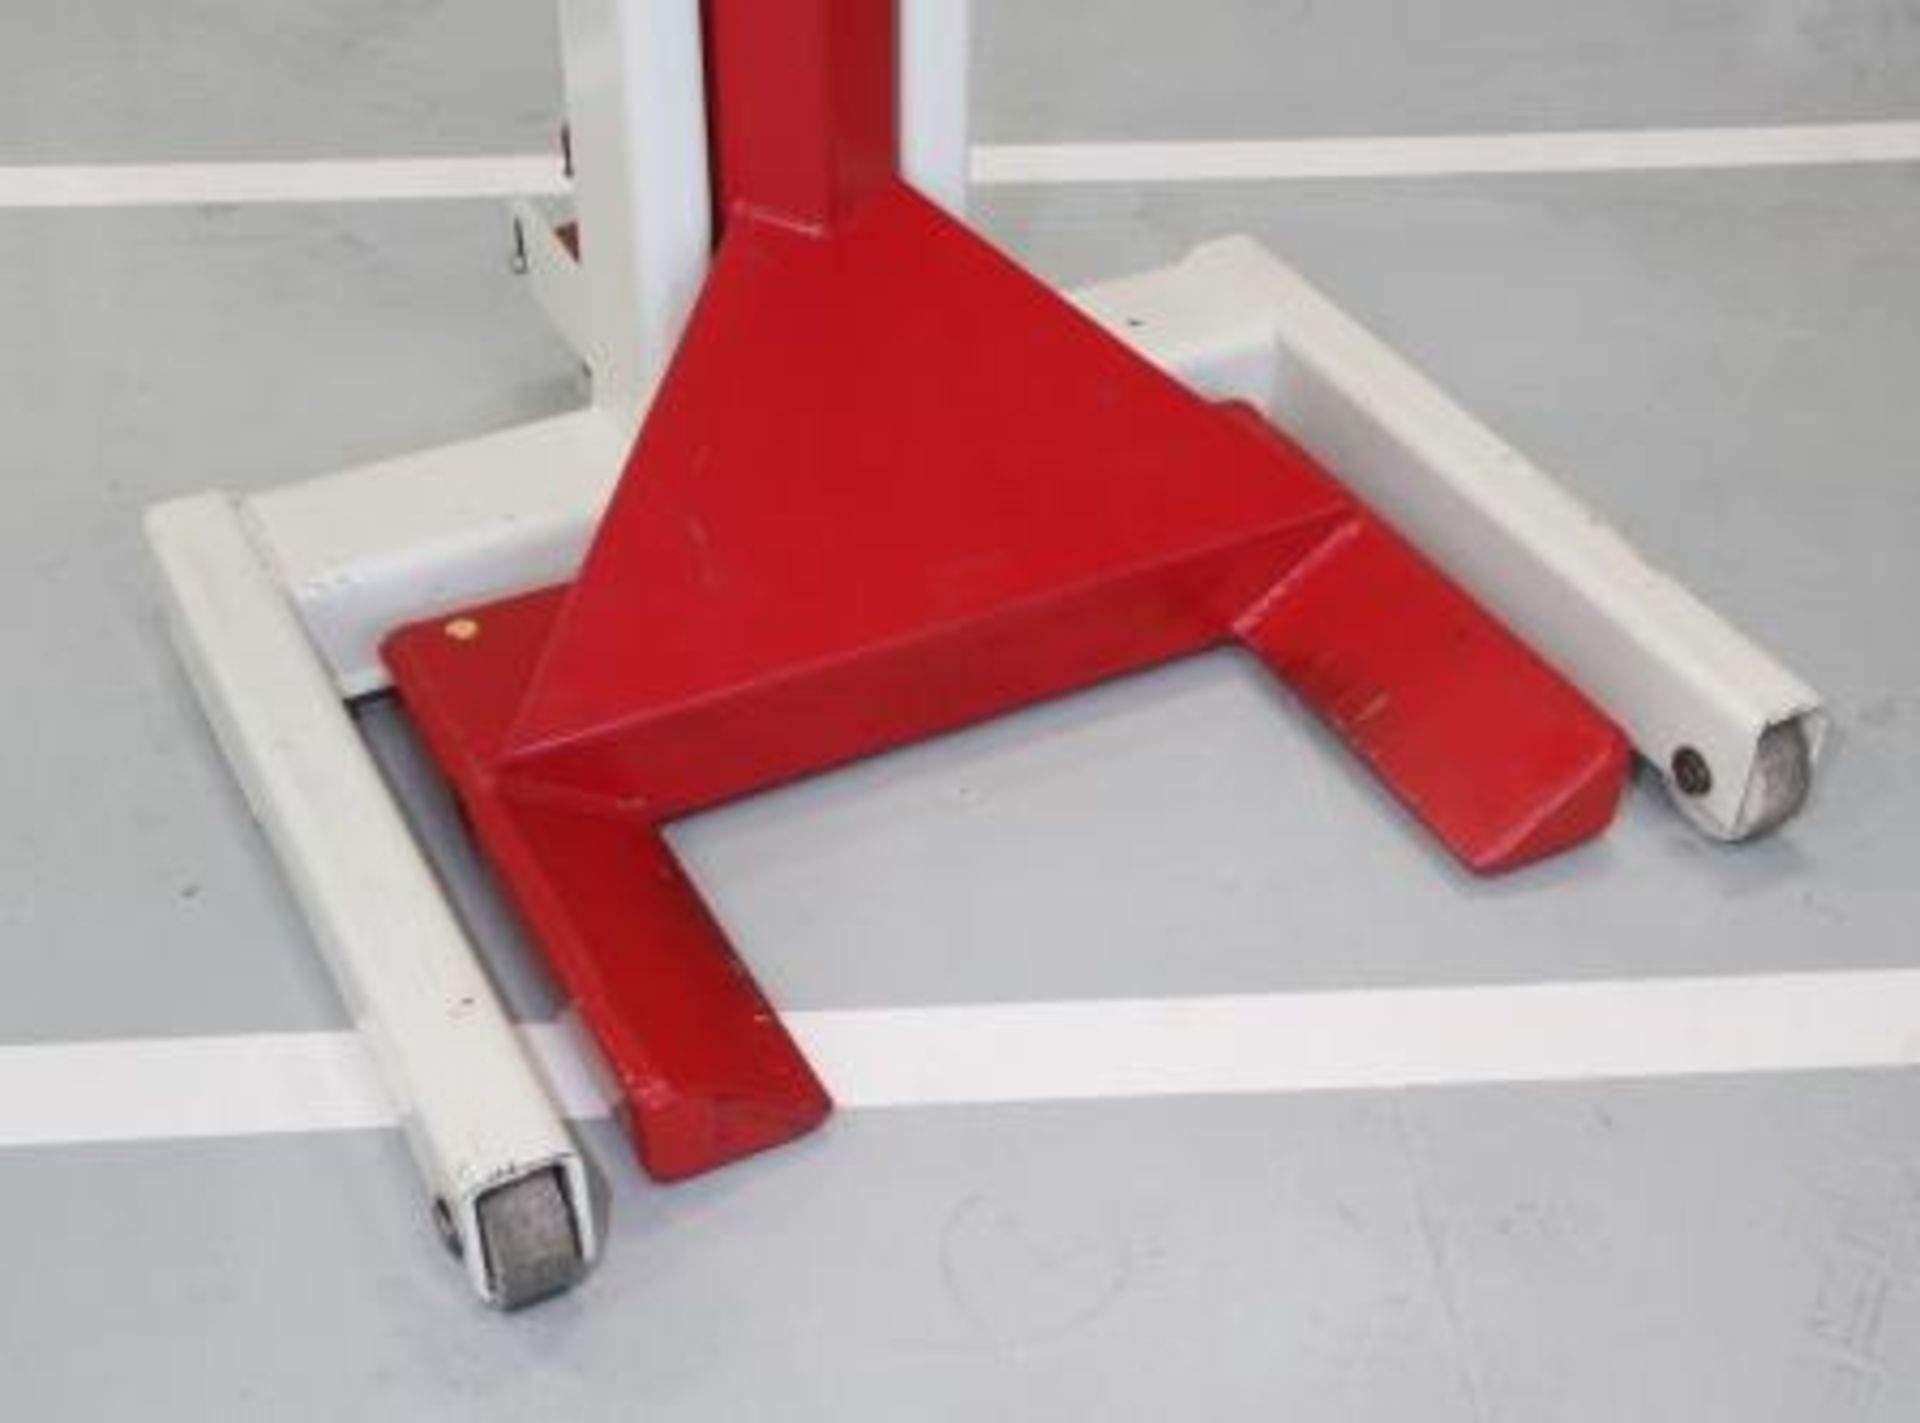 Stertil Koni Mobile Column Lifts (Cabled) - Image 6 of 24